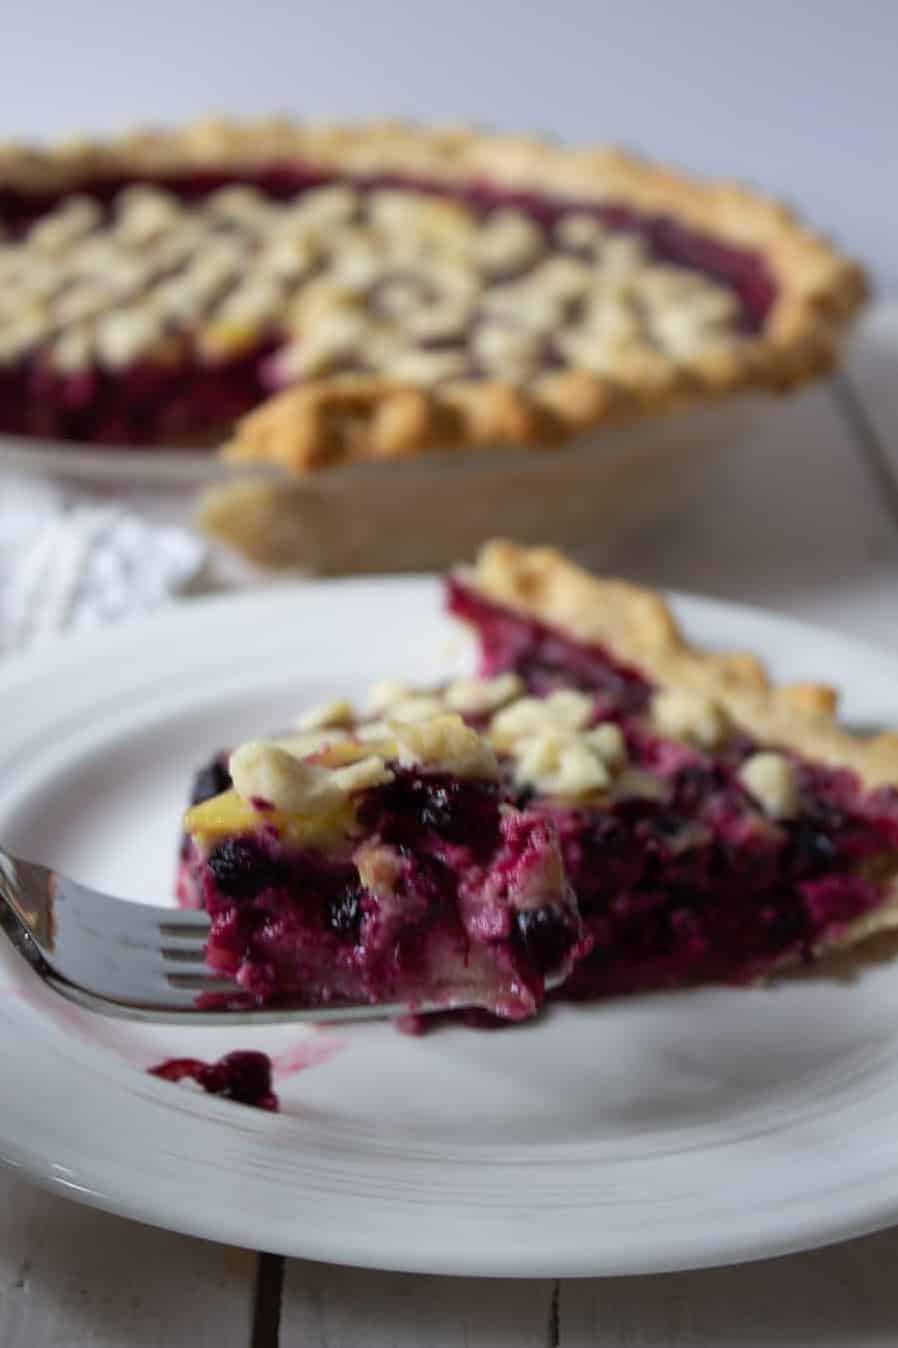  The vibrant colors of fresh berries in a warm and comforting pie.